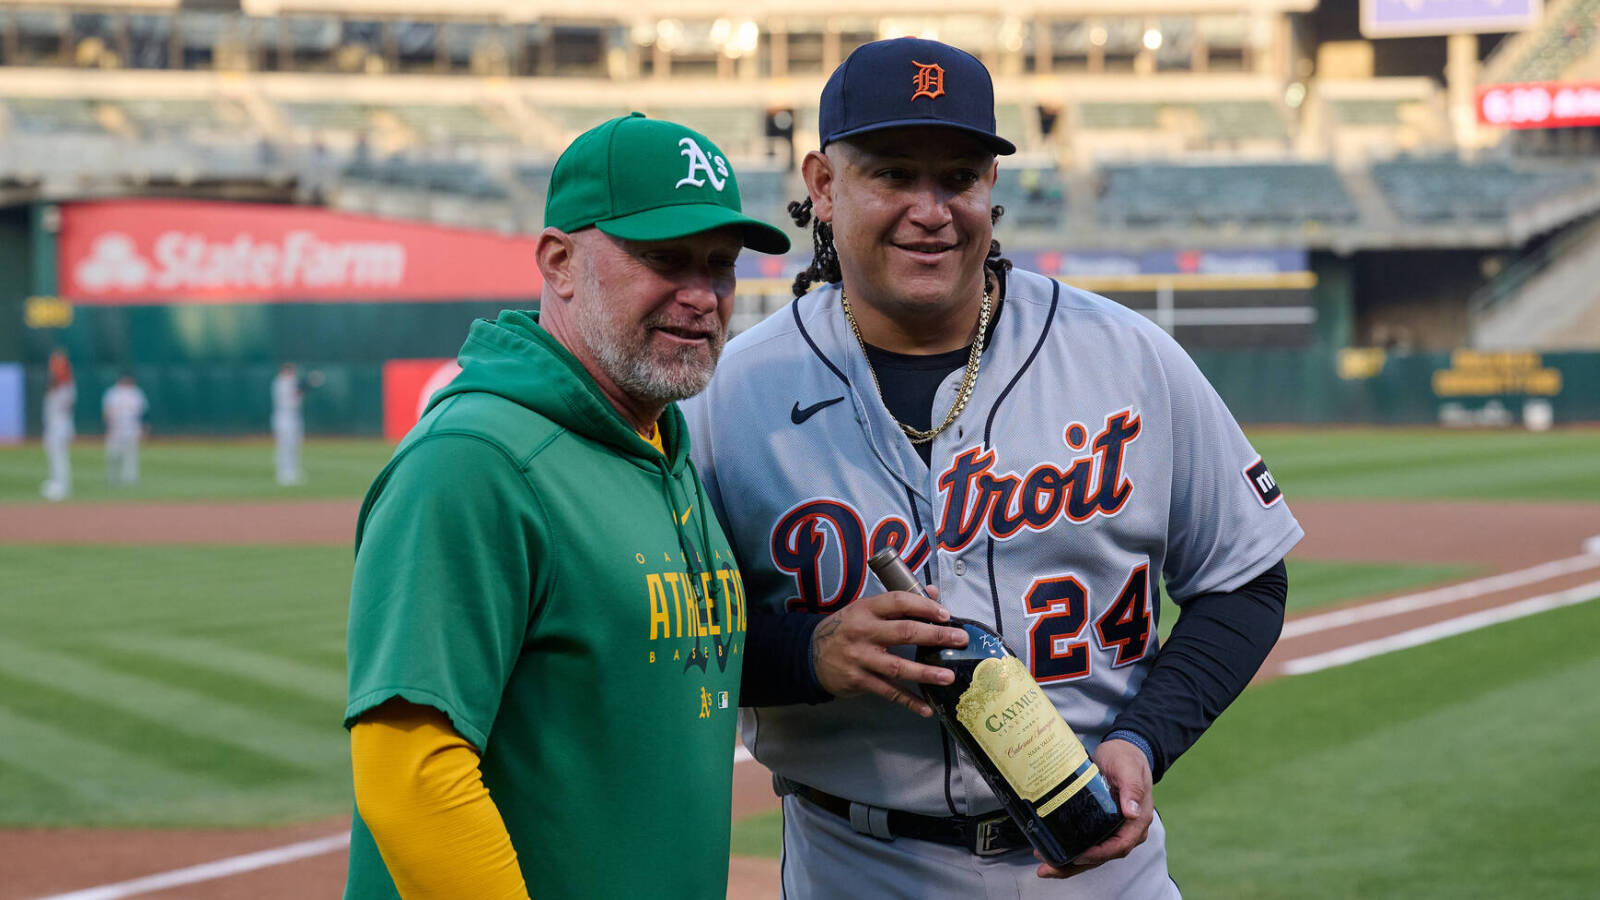 A's fan nailed prediction of Tigers legend's retirement gift